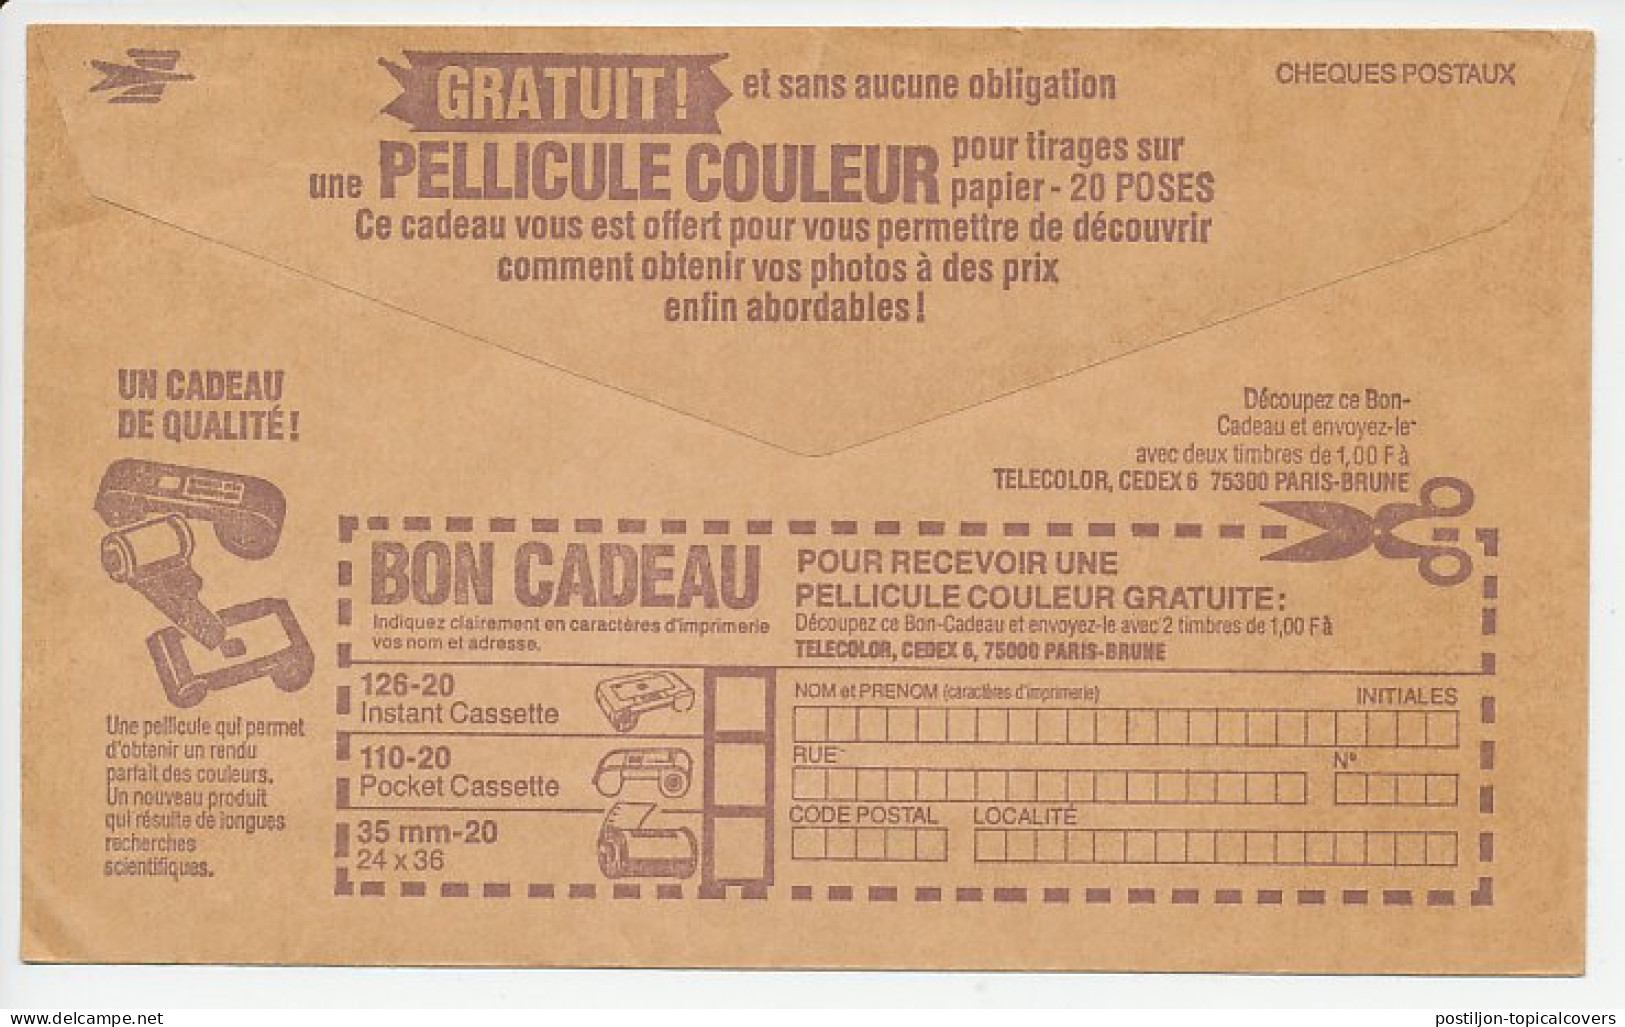 Postal Cheque Cover France Photographic Film - Photography